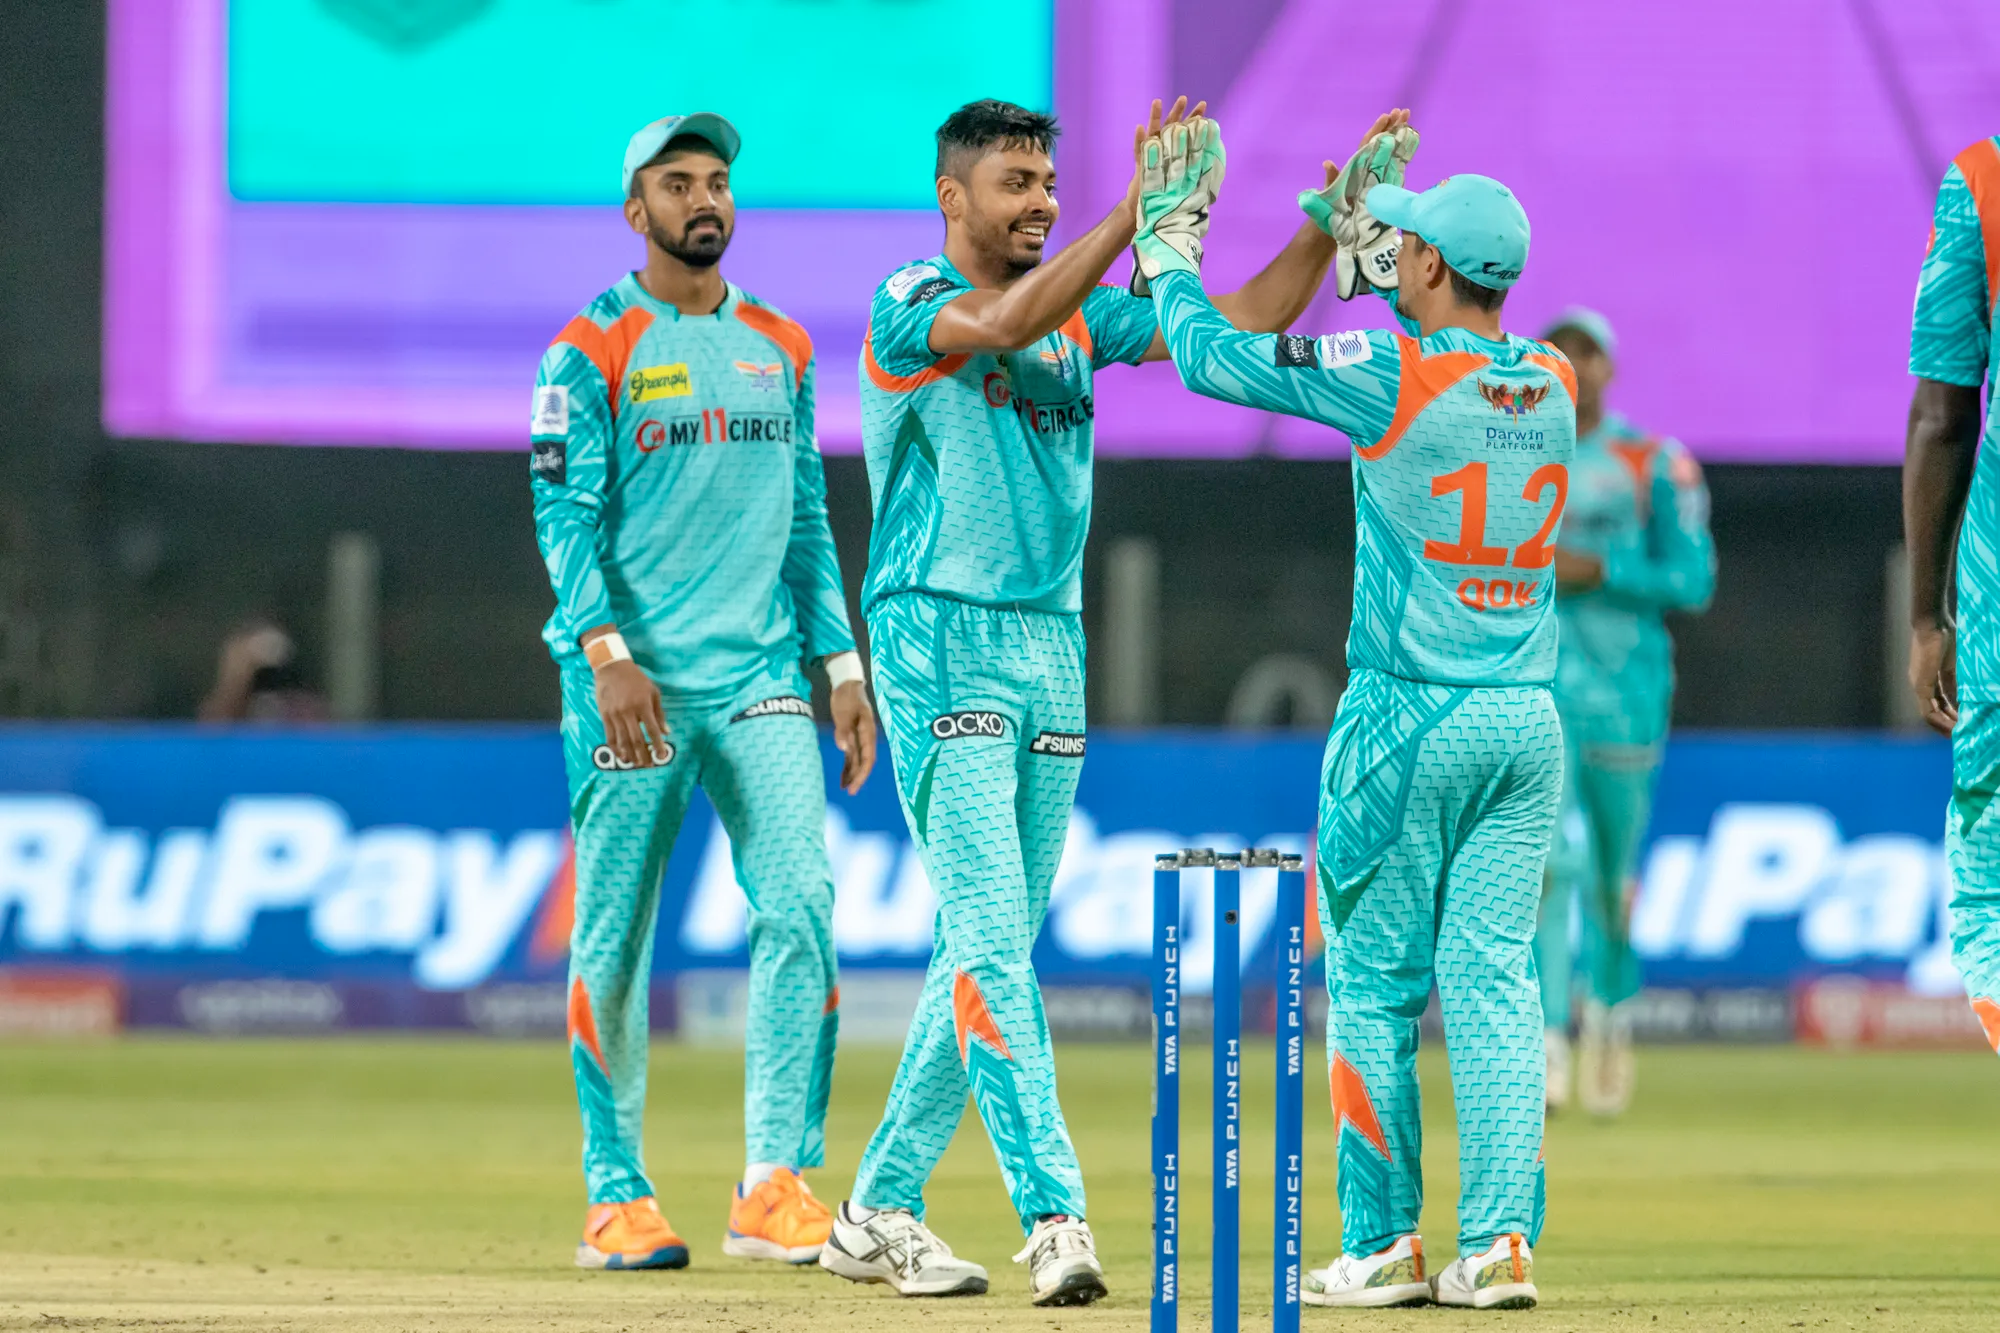 LSG Qualification Scenario: How Lucknow Super Giants Can Qualify For IPL 2022 Playoffs? - Cricket Addictor